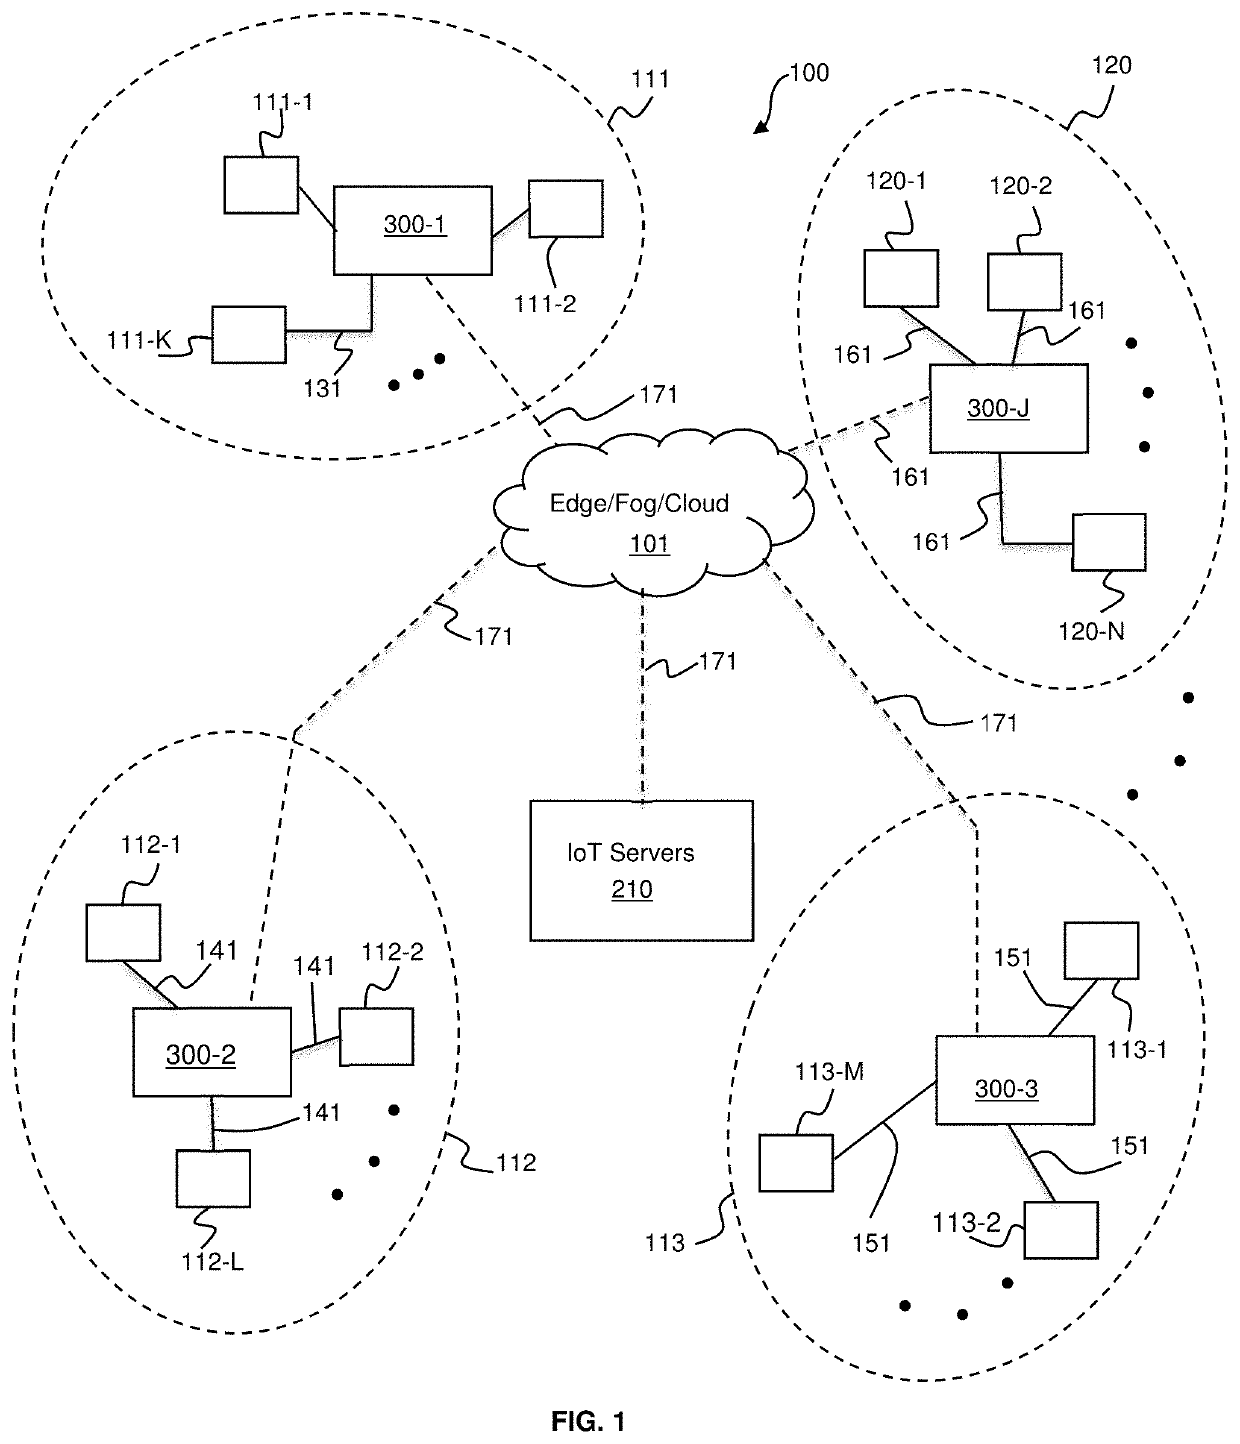 METHOD AND SMART PARKING SYSTEM USING INTELLIGENT PLUG-AND-PLAY POINT TO MULTIPOINT INTERNET of THINGS (IoT) PLATFORM